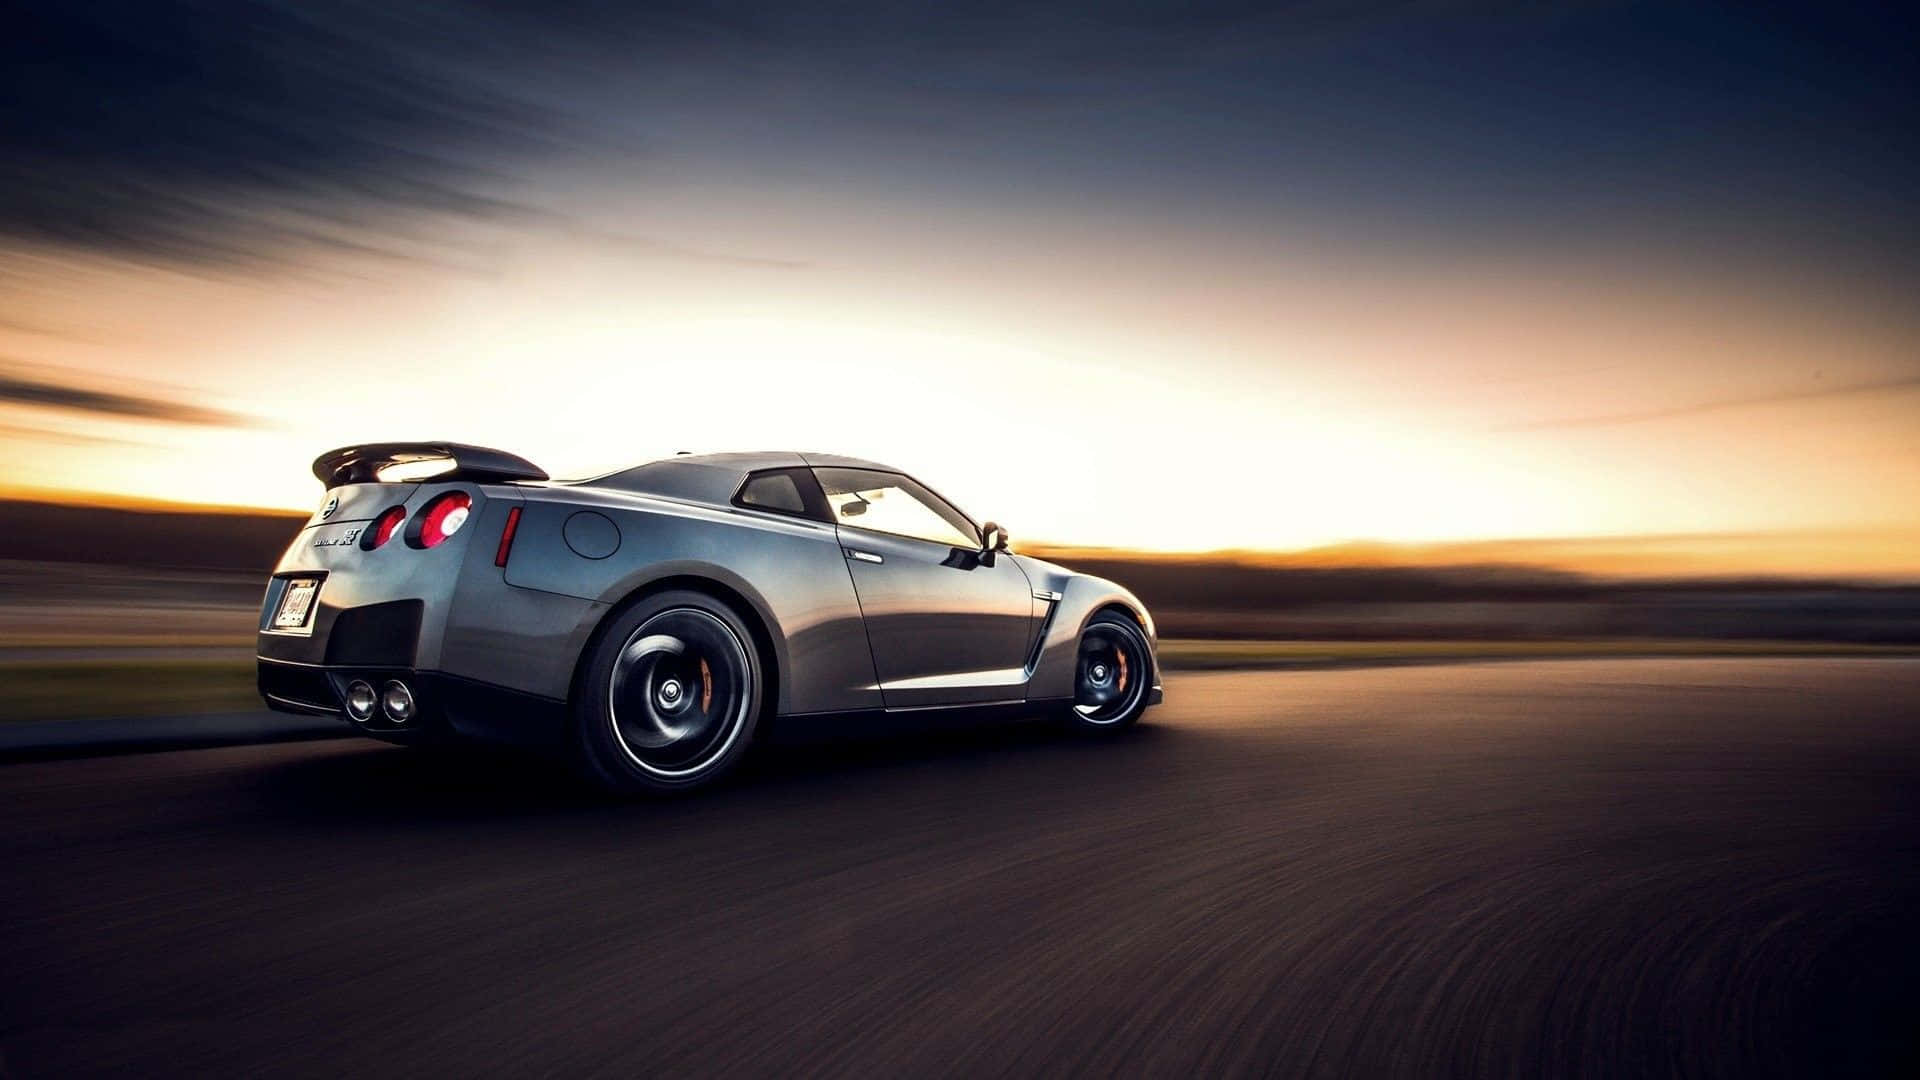 Speed, Style And Power - The Nissan Gtr R35 Background